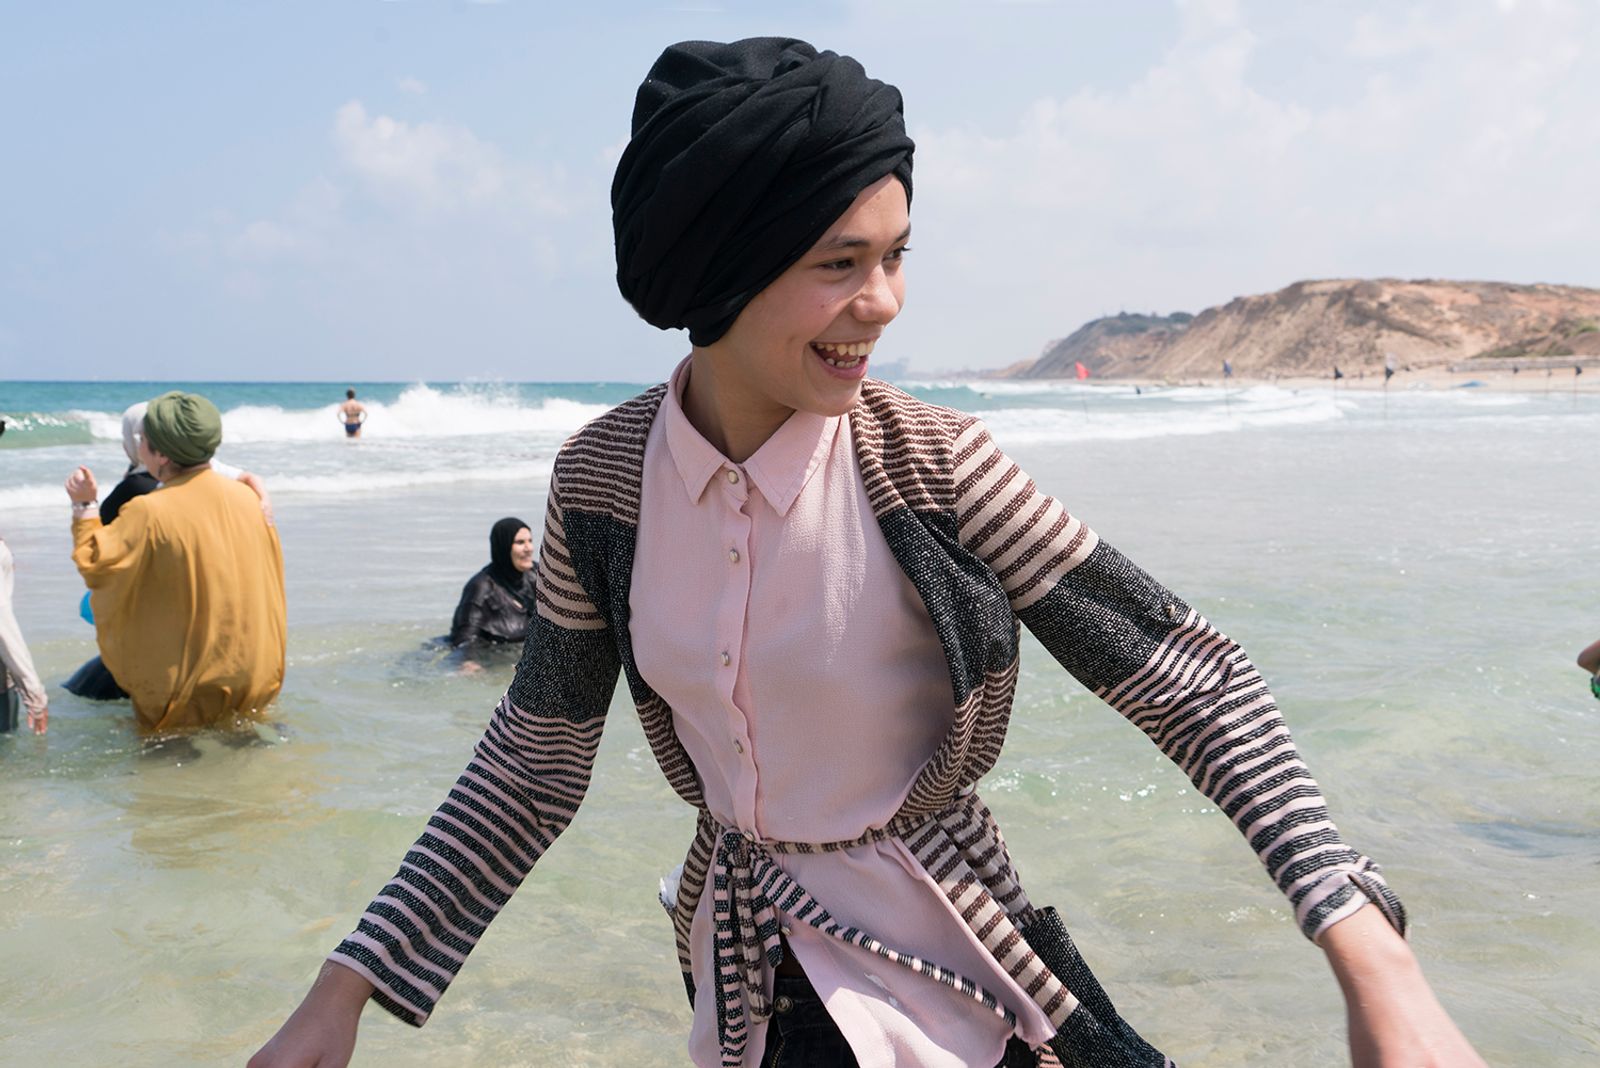 © Deborah Morag - Image from the Palestinian women first time at Tel Aviv beach photography project